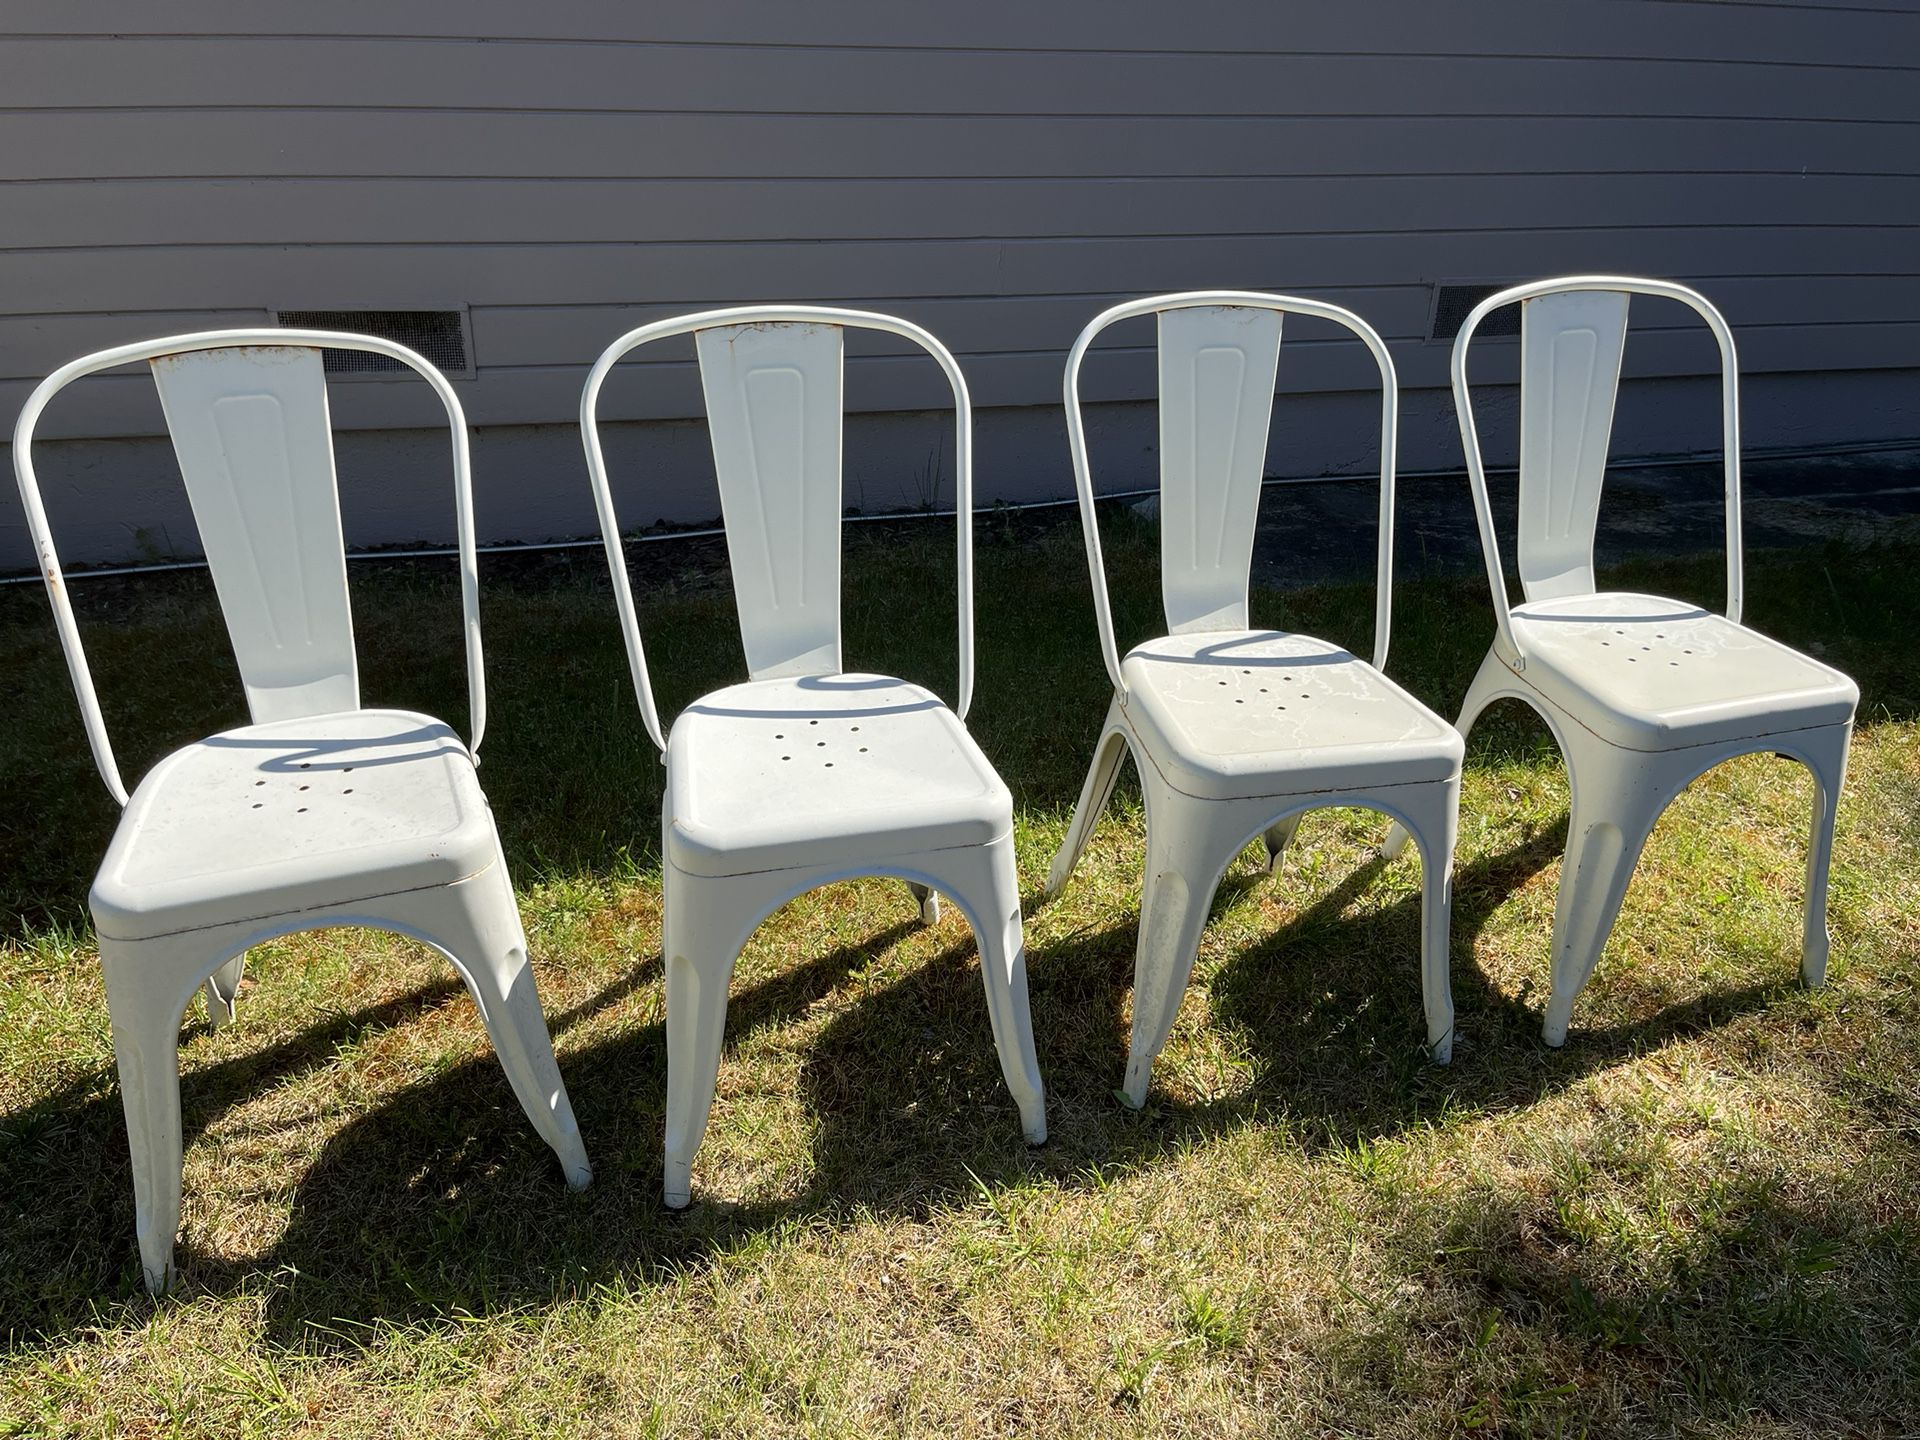 6 Steel Stackable Chairs White